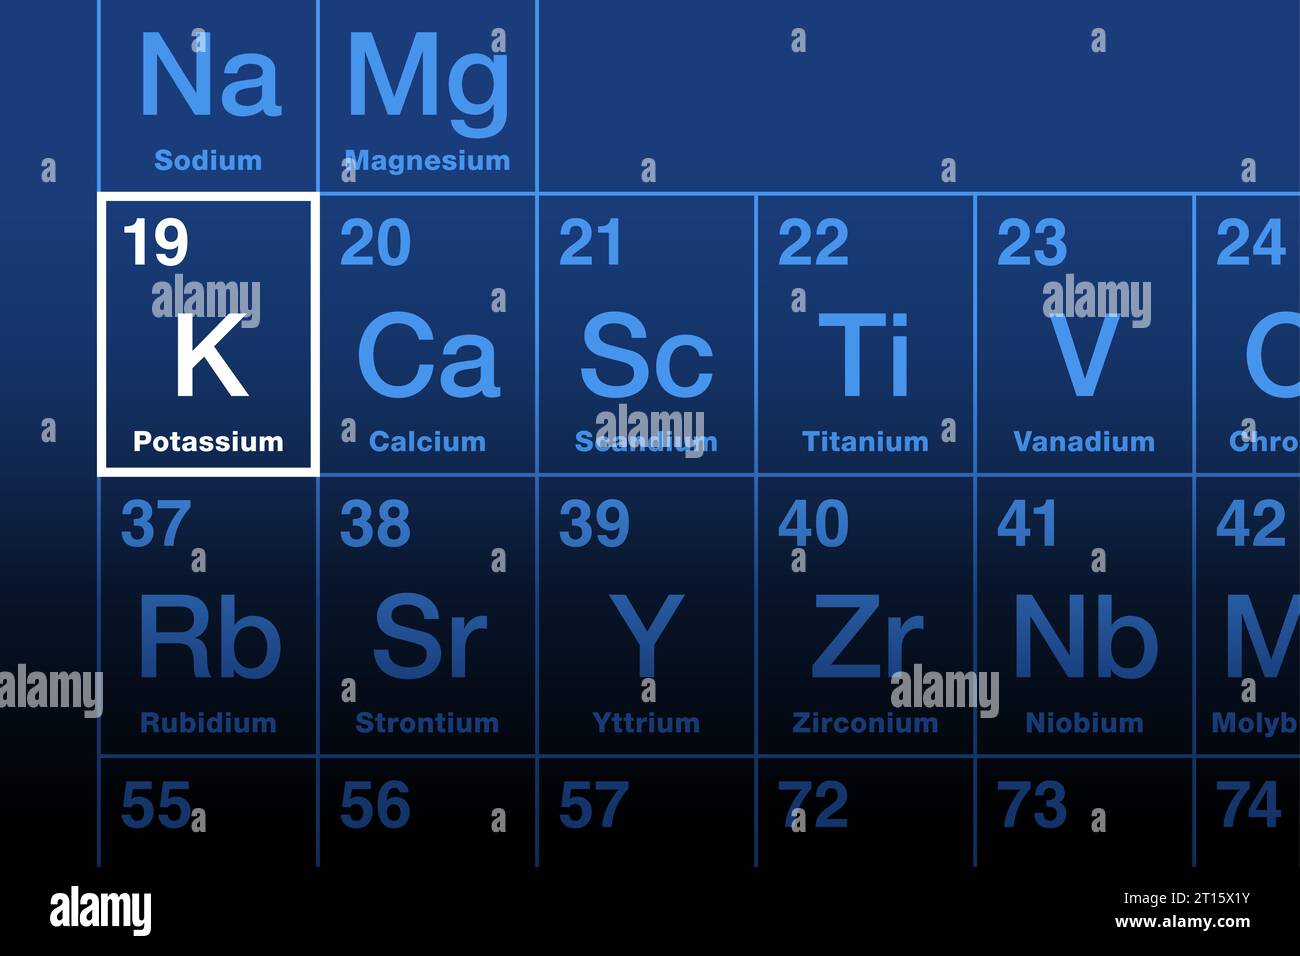 Potassium element on the periodic table. Alkali metal with element symbol K from kalium, and with atomic number 19. Essential for all living cells. Stock Photo